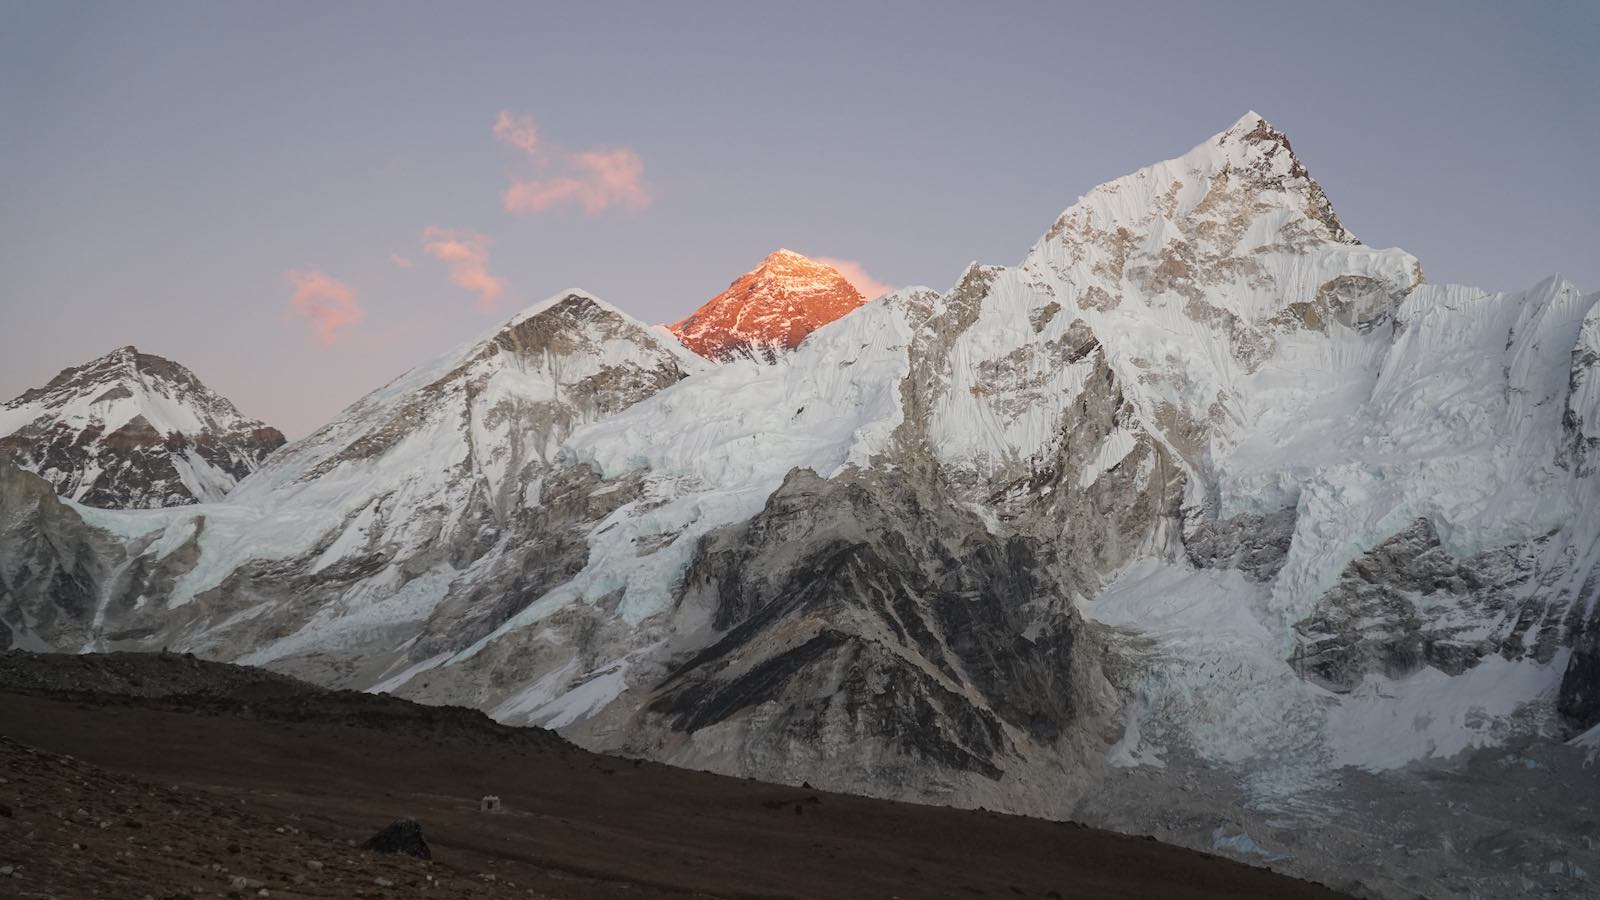 Afterwards I hiked up to a viewpoint near Gorakshep for a view of everest during sunset. It really highlights that it is the highest peak around here even though it doesn't look like it from first glance.